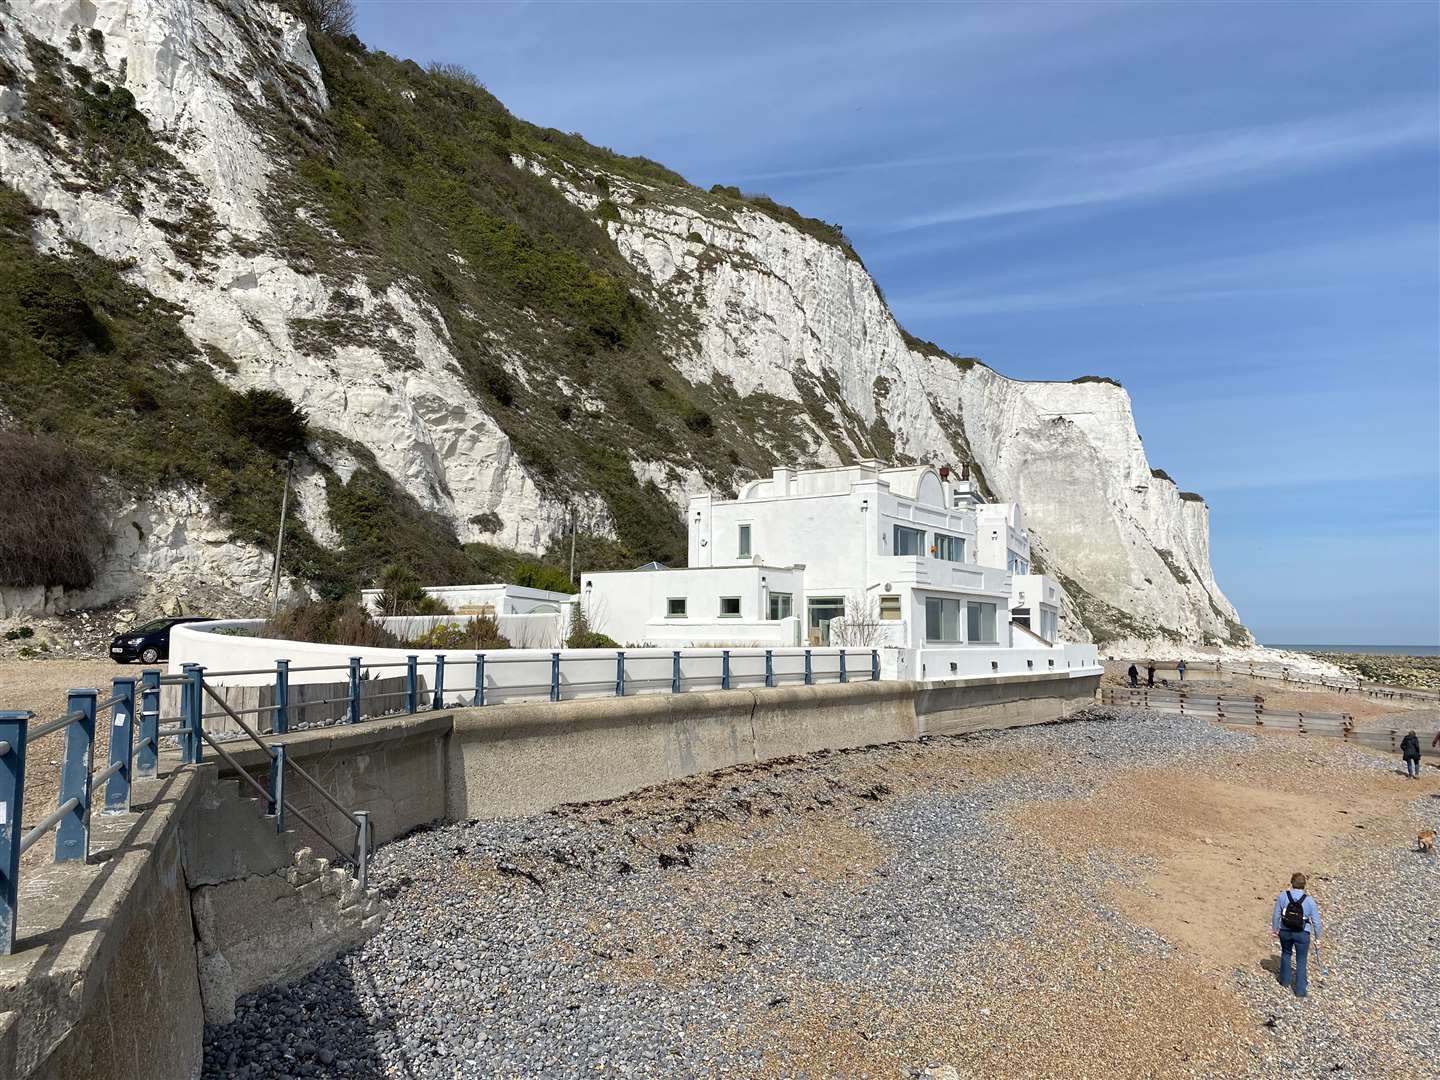 St Margaret's Bay is a small beach at the foot of the striking White Cliffs - perfect for photos. Picture: KM reporter